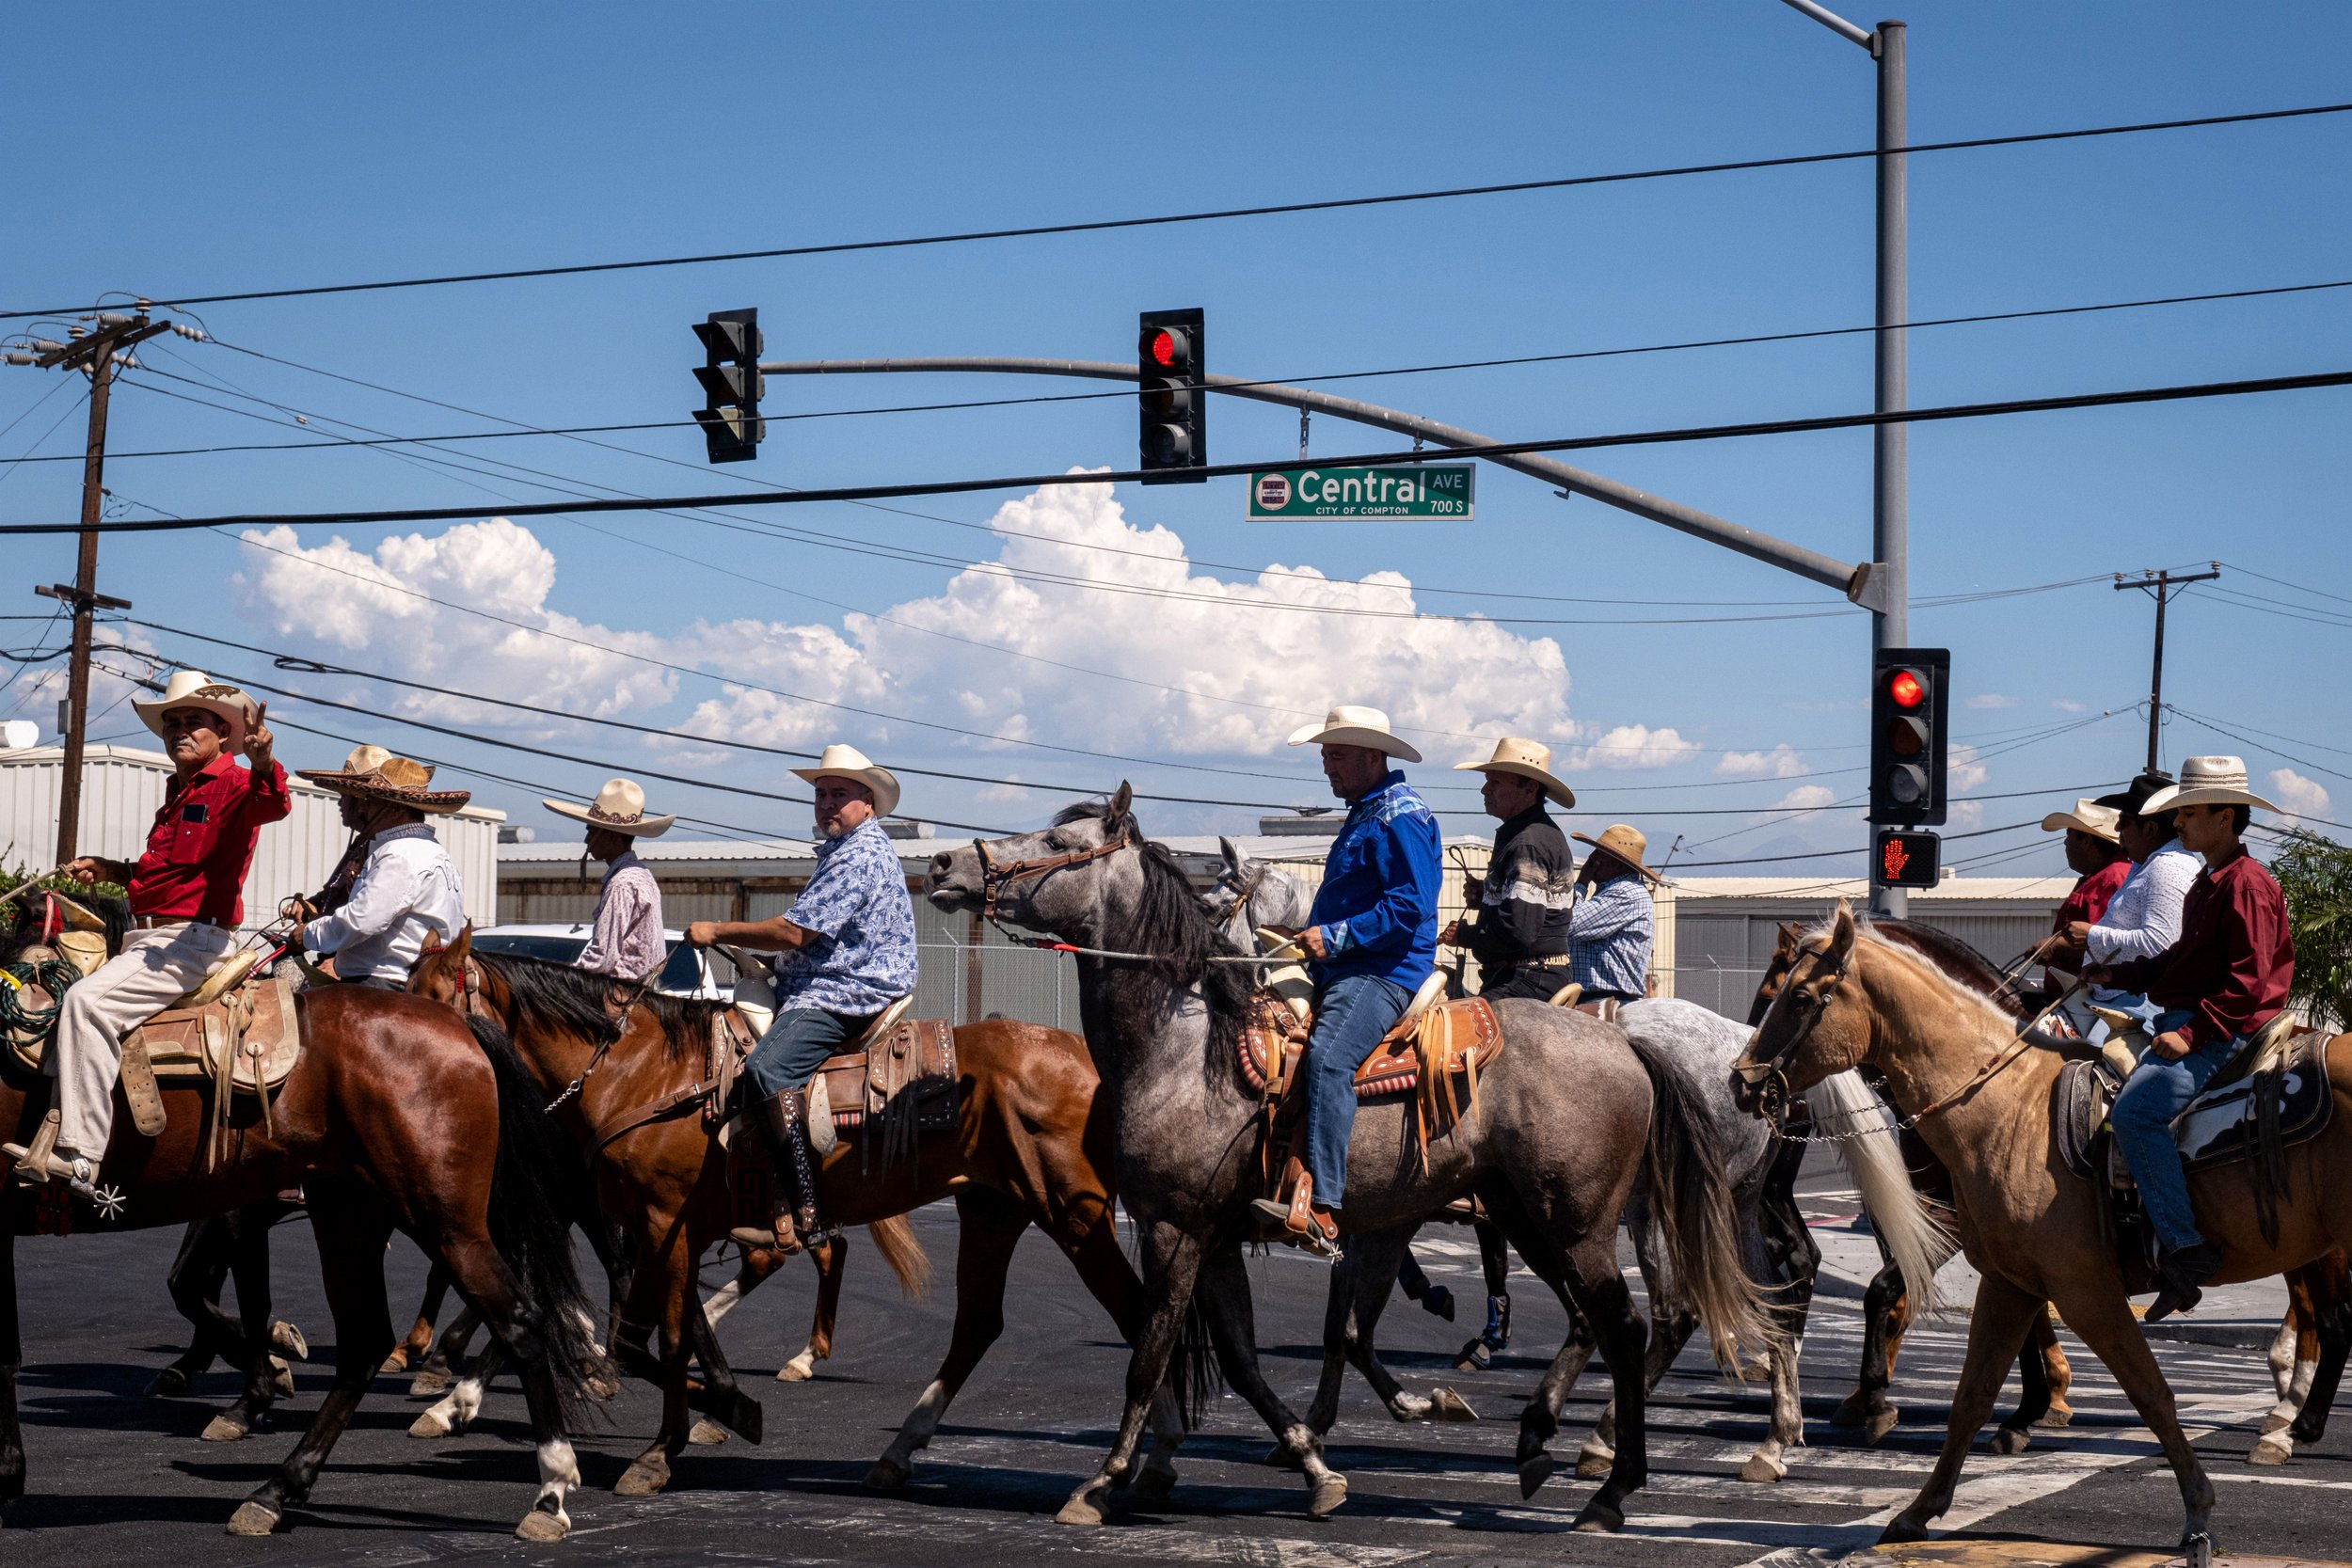  Over two hundred riders and their horses made a left turn onto Central Ave. The herd, led by&nbsp; Connecting Compton, rode towards an empty Brownfield site, where the nonprofit has goals of building a Multicultural Equestrian Center, with the appro